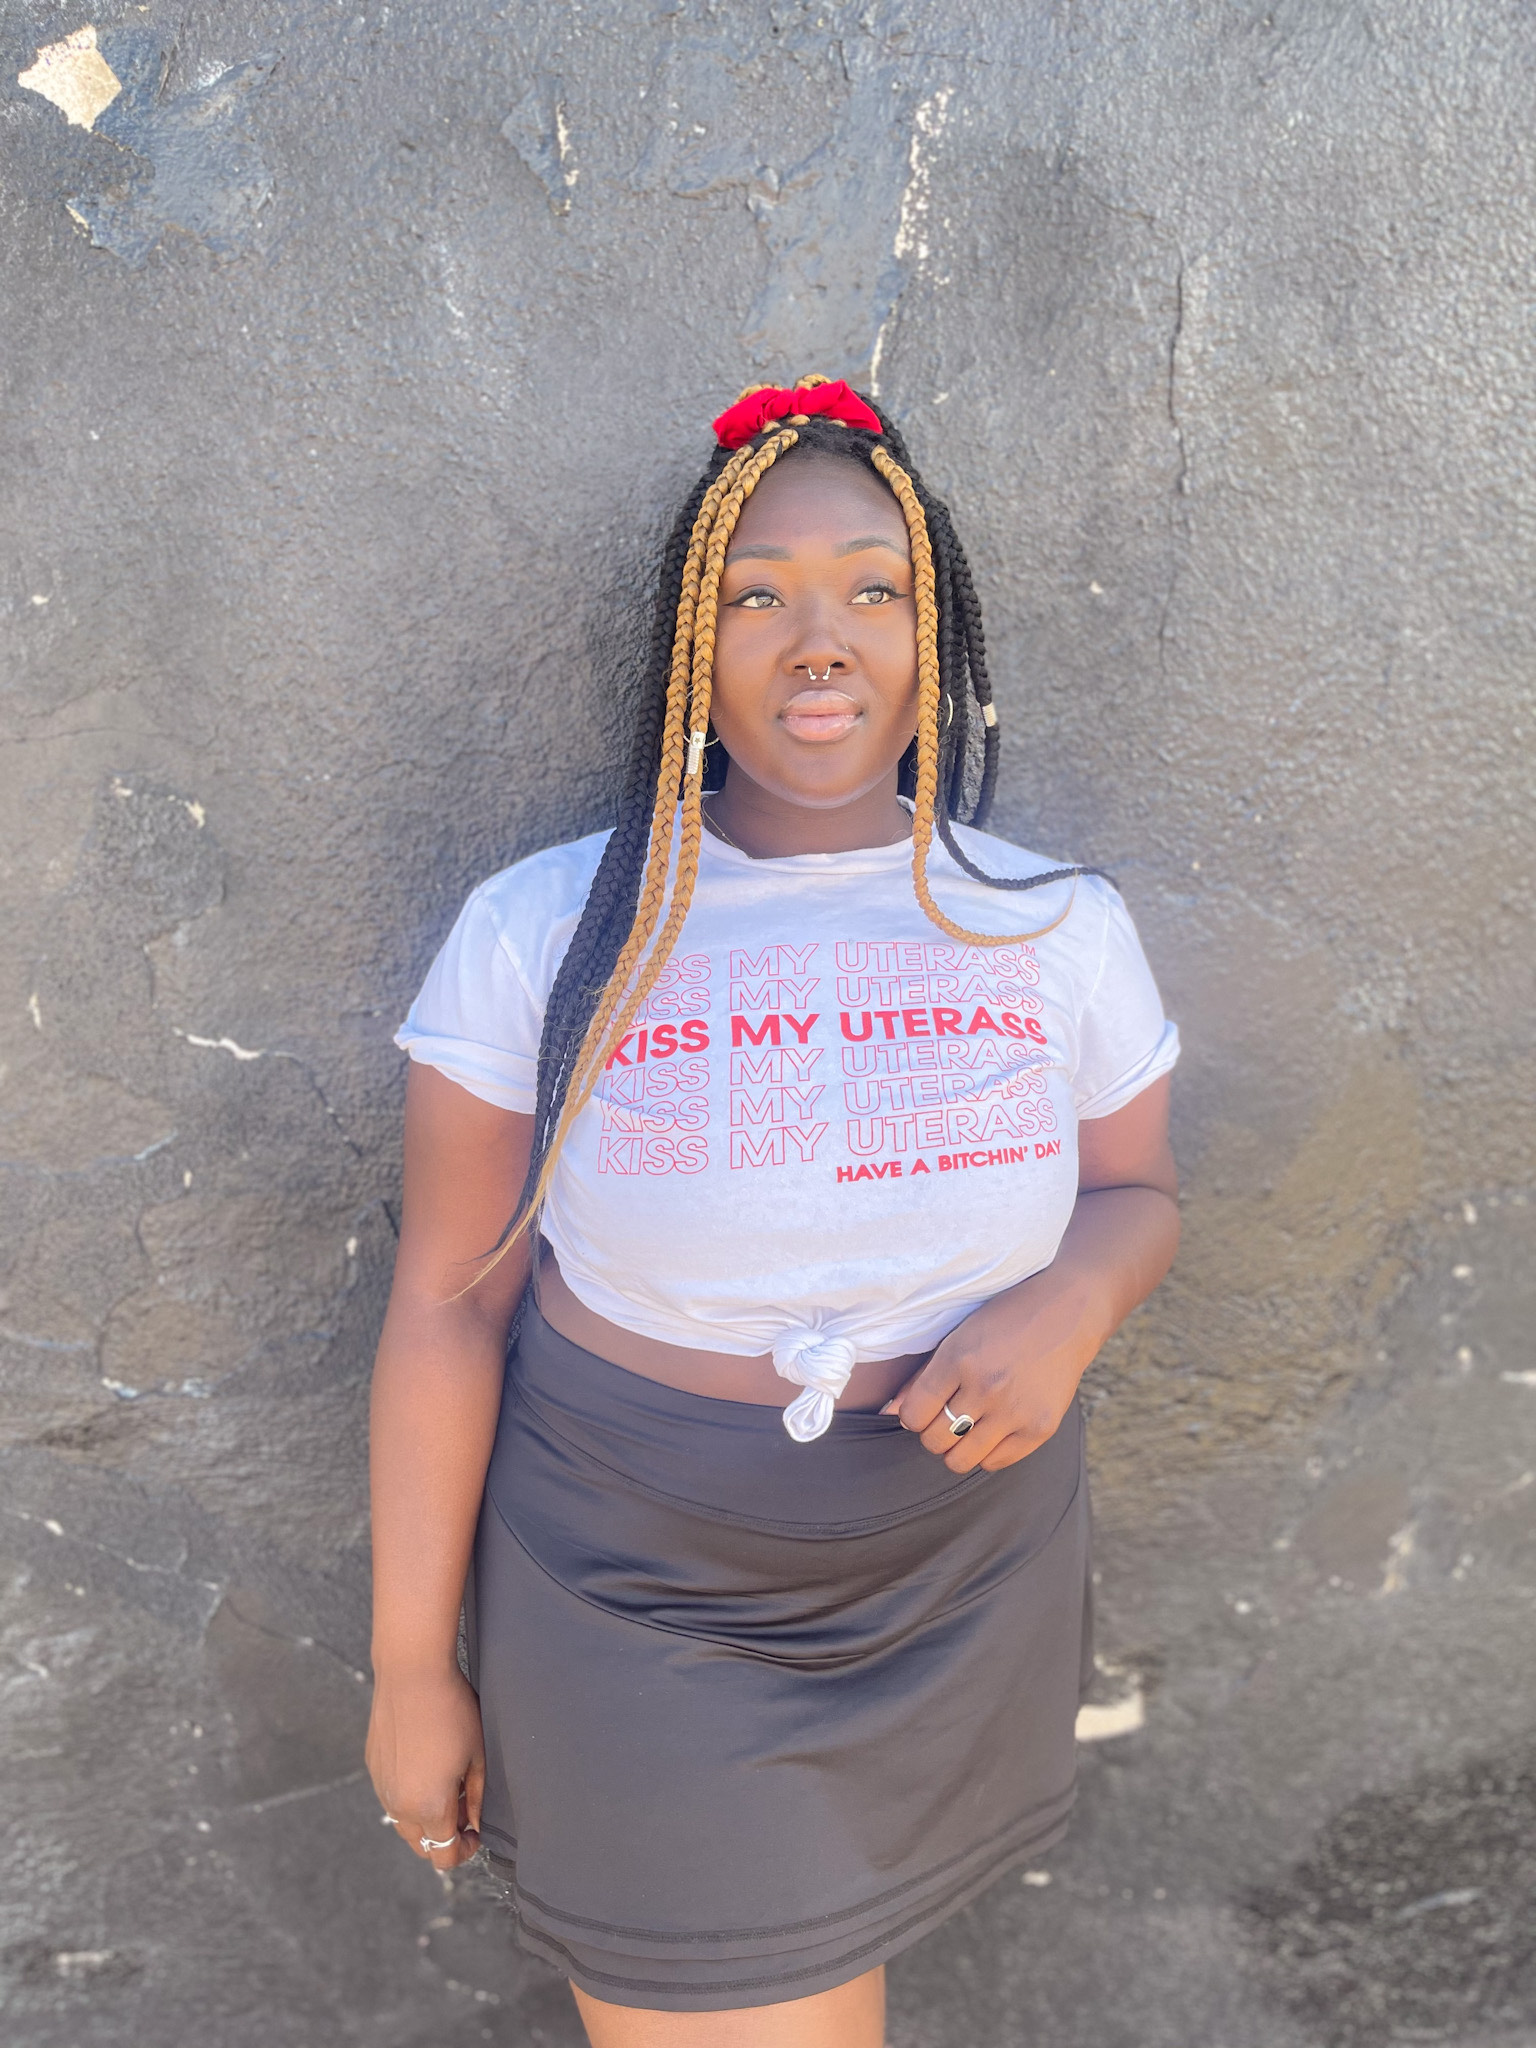 Kiss My Uterass — Local Clothing Brand Rooted in Women’s Empowerment